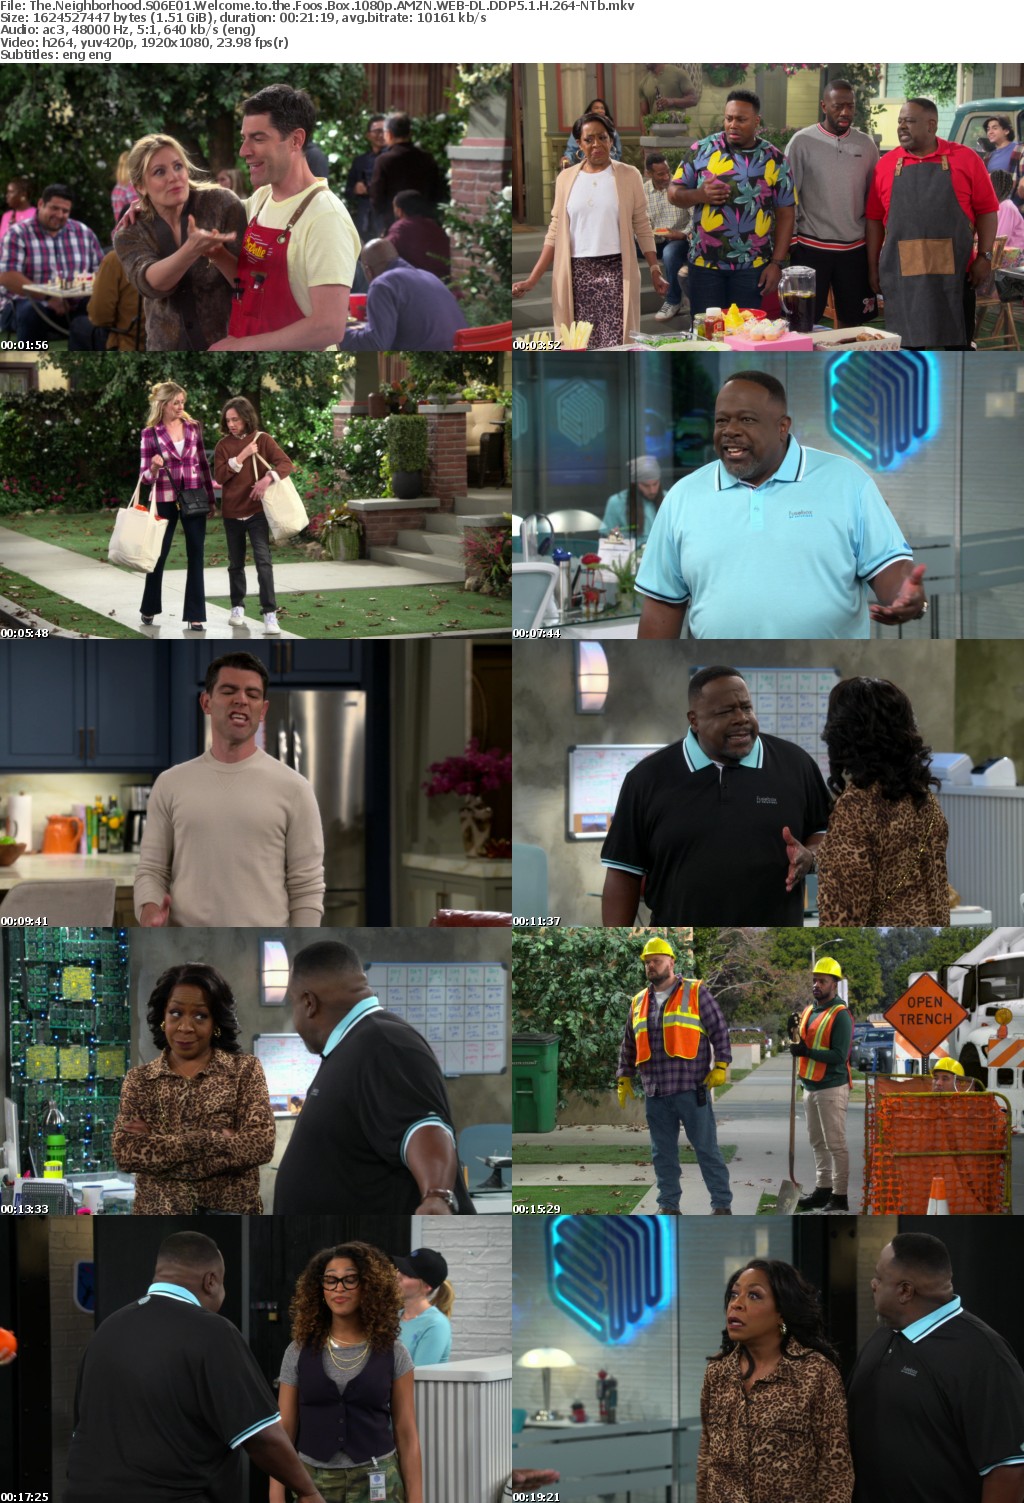 The Neighborhood S06E01 Welcome to the Foos Box 1080p AMZN WEB-DL DDP5 1 H 264-NTb